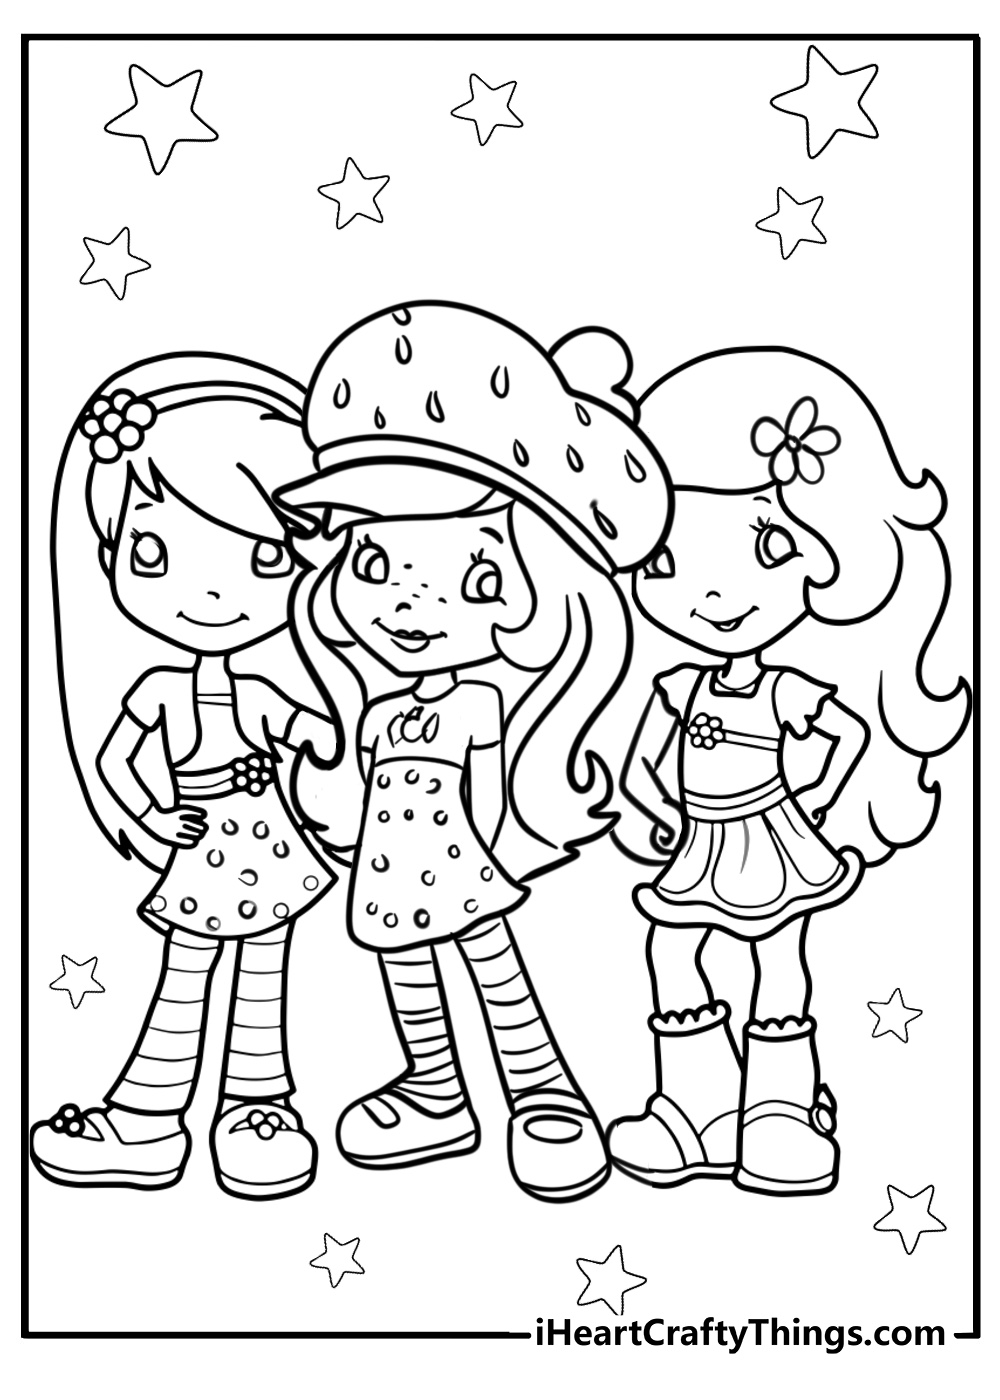 Strawberry shortcake coloring page with orange blossom and crepe